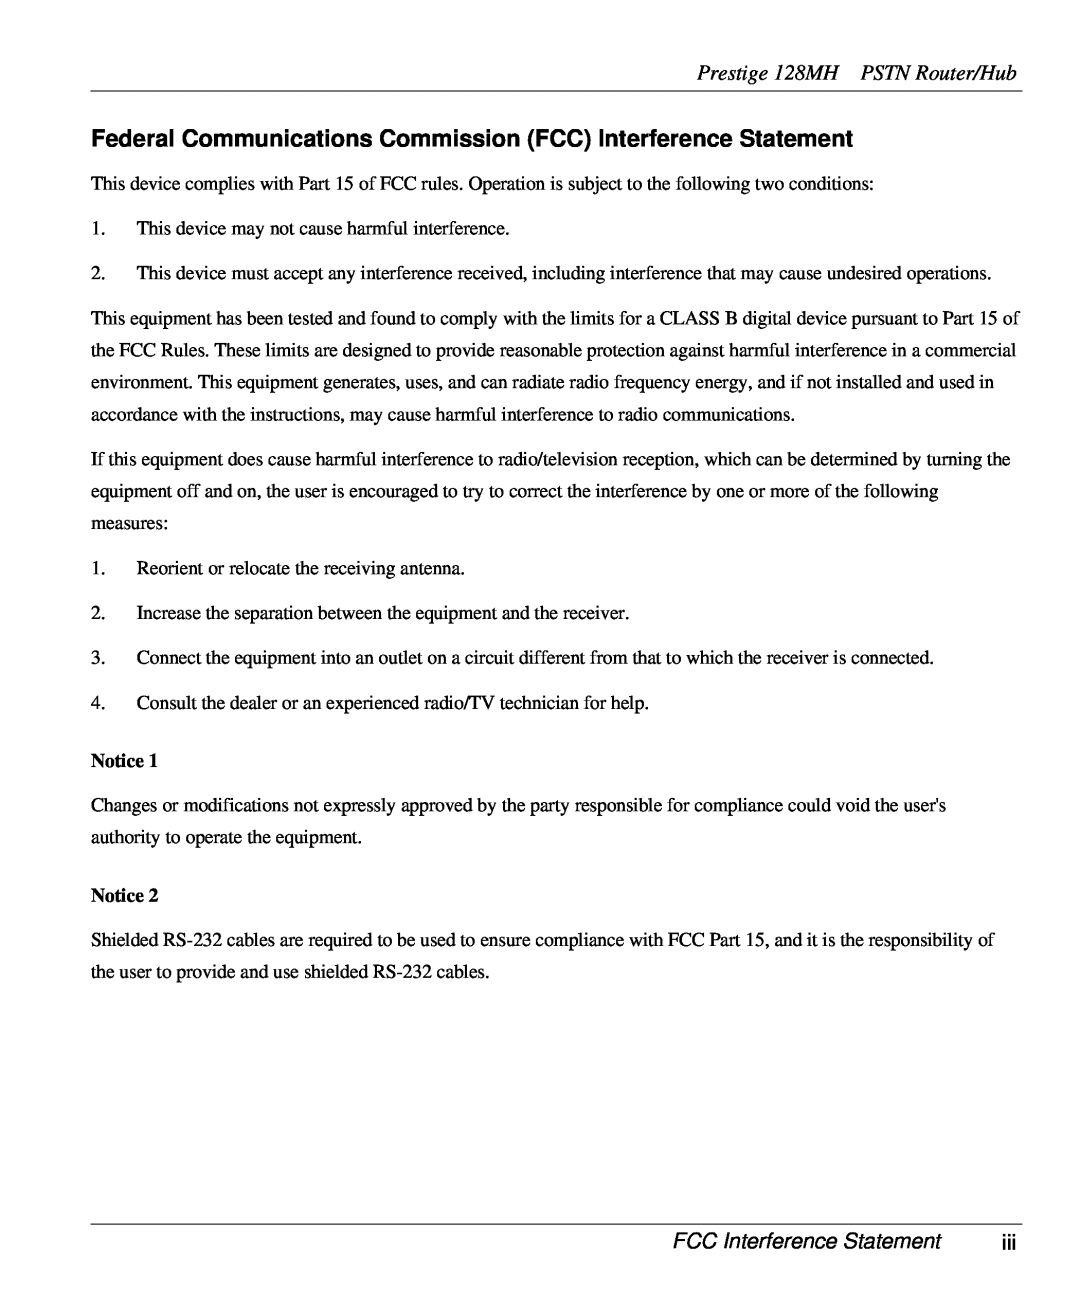 ZyXEL Communications Federal Communications Commission FCC Interference Statement, Prestige 128MH PSTN Router/Hub 